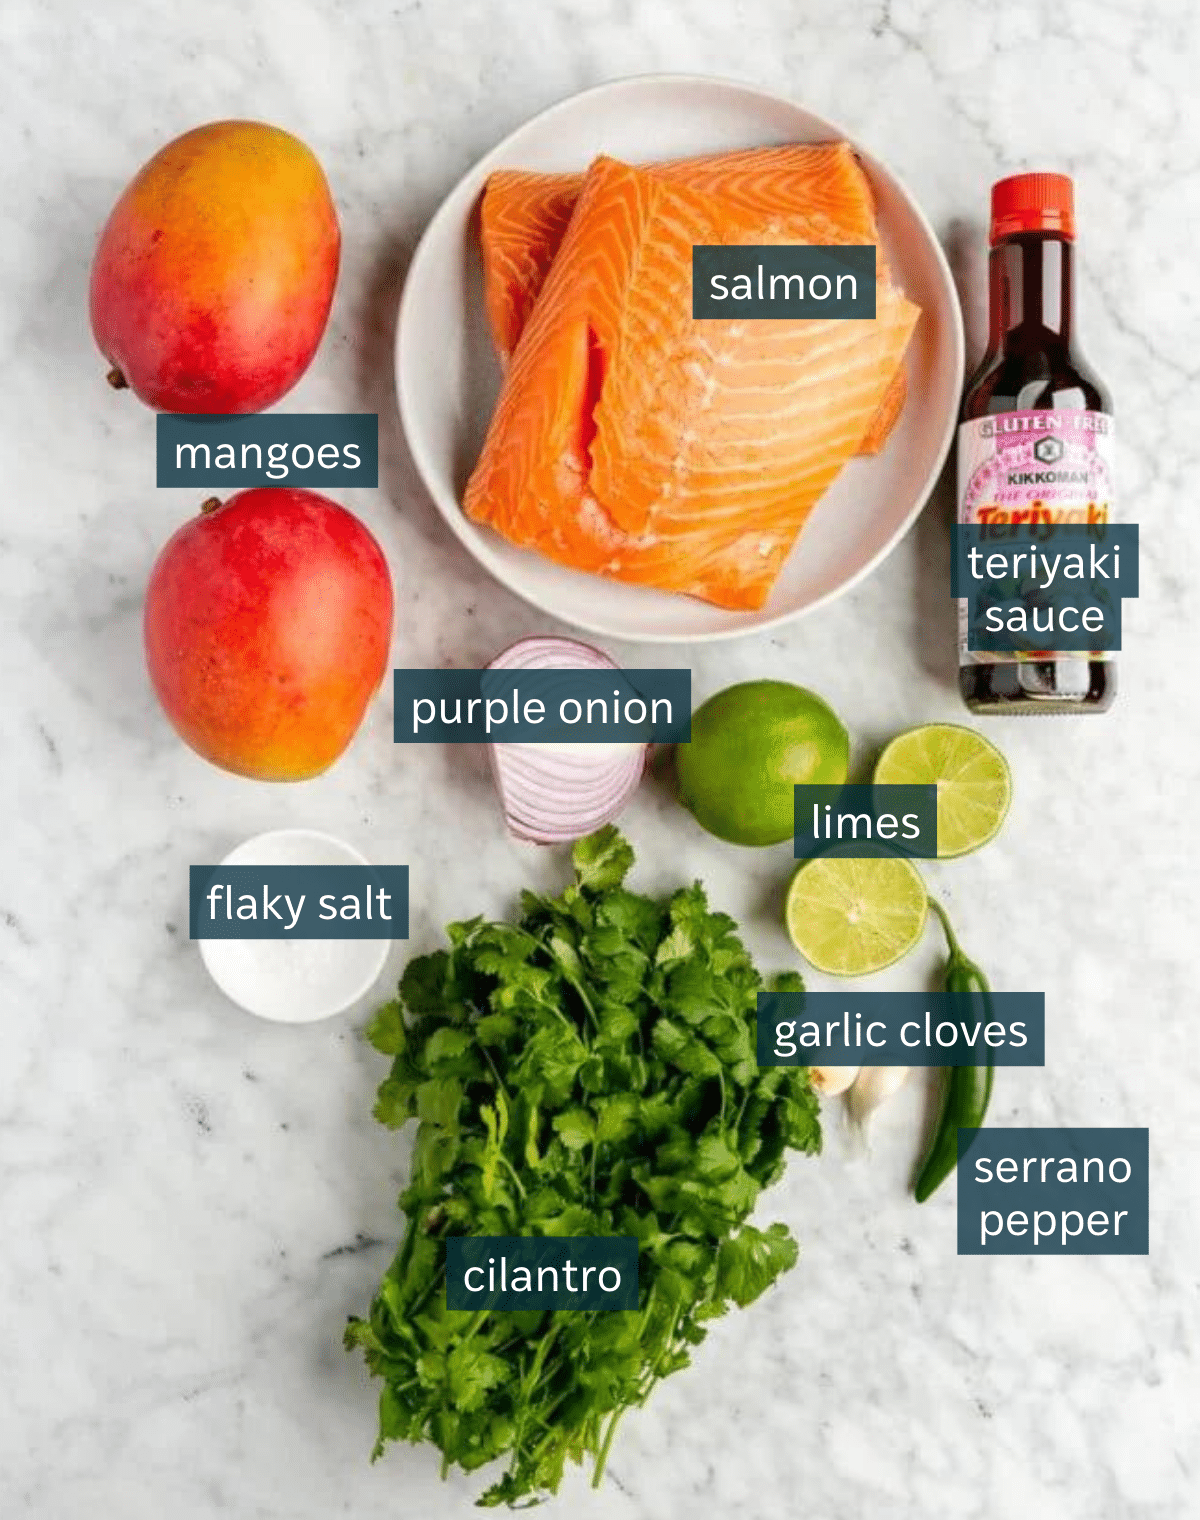 Ingredients for teriyaki salmon bowls sit on a a marble countertop.